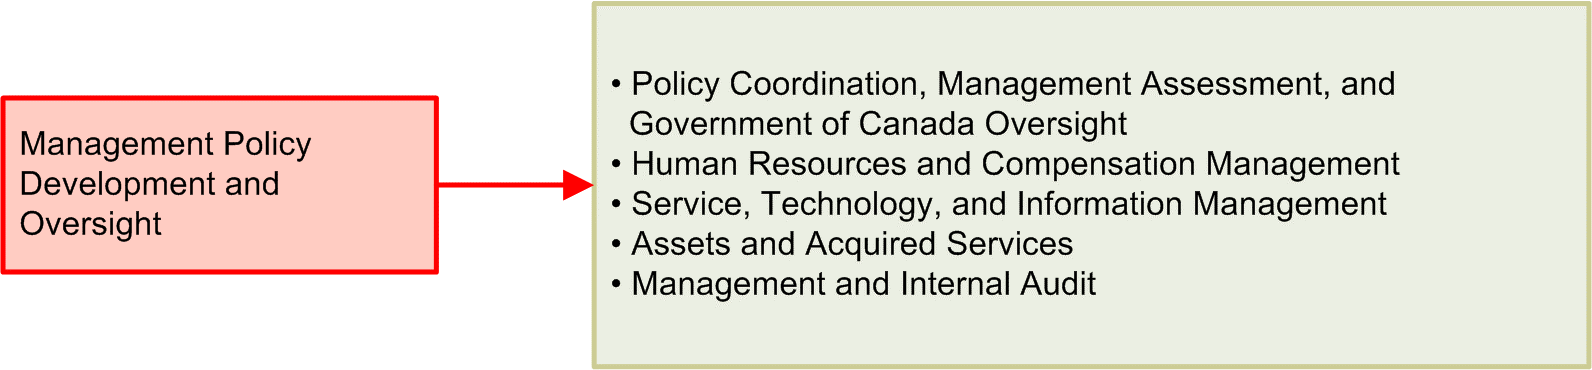 Management Policy Development and Oversight